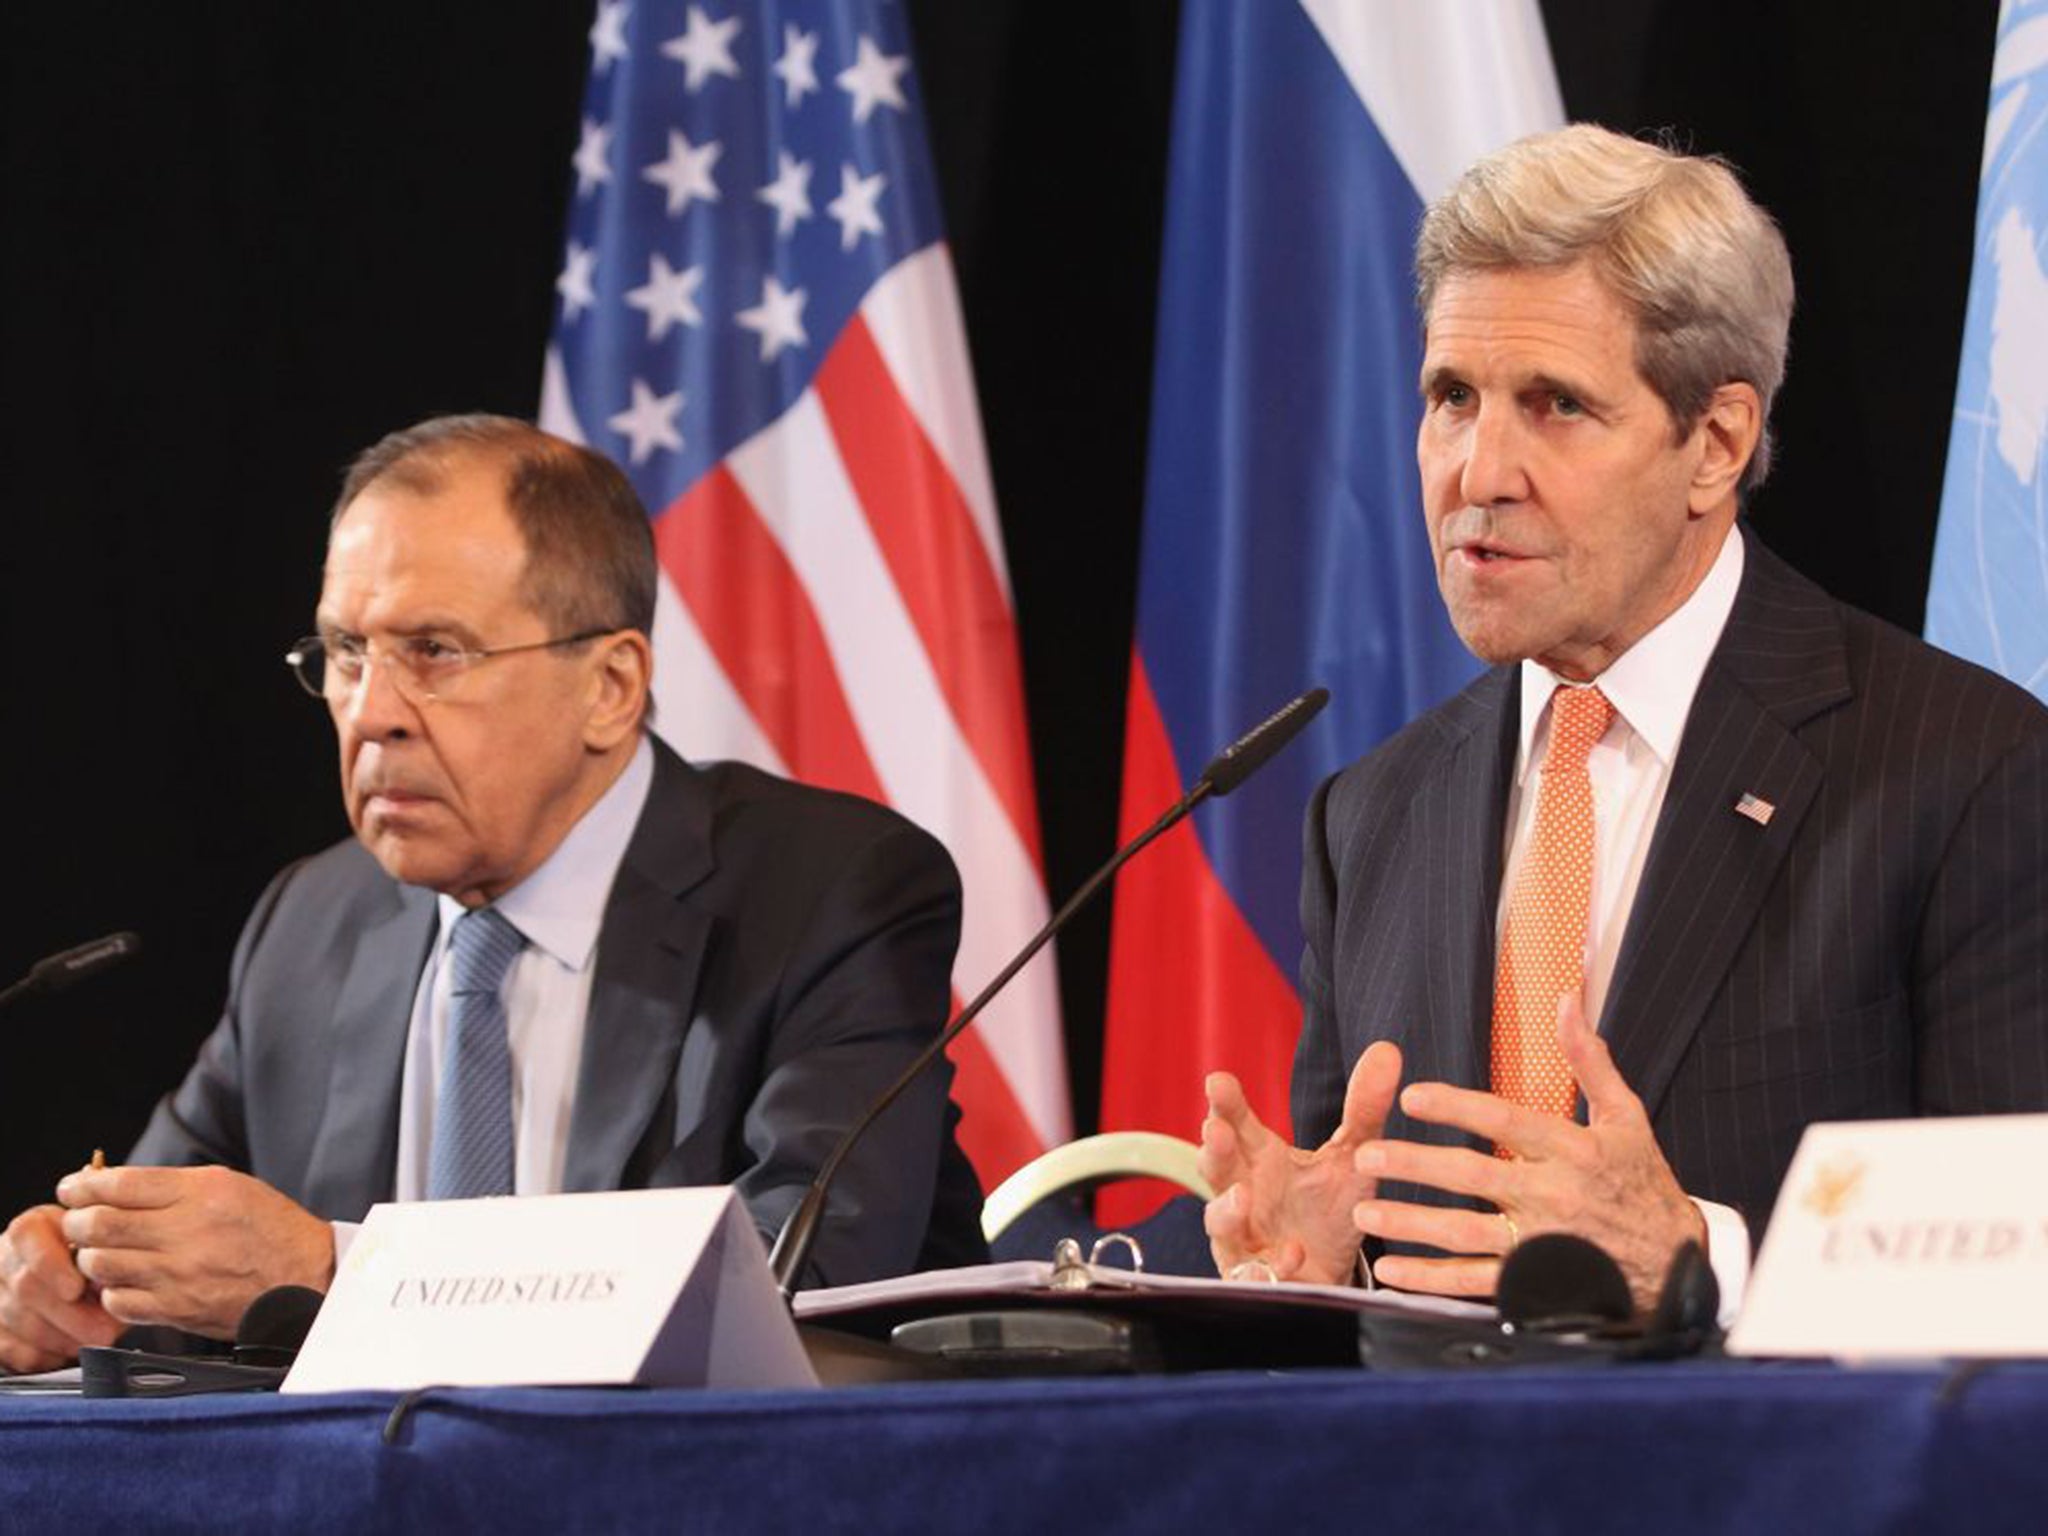 Russia’s Sergei Lavrov, left, and the US’s John Kerry on Thursday